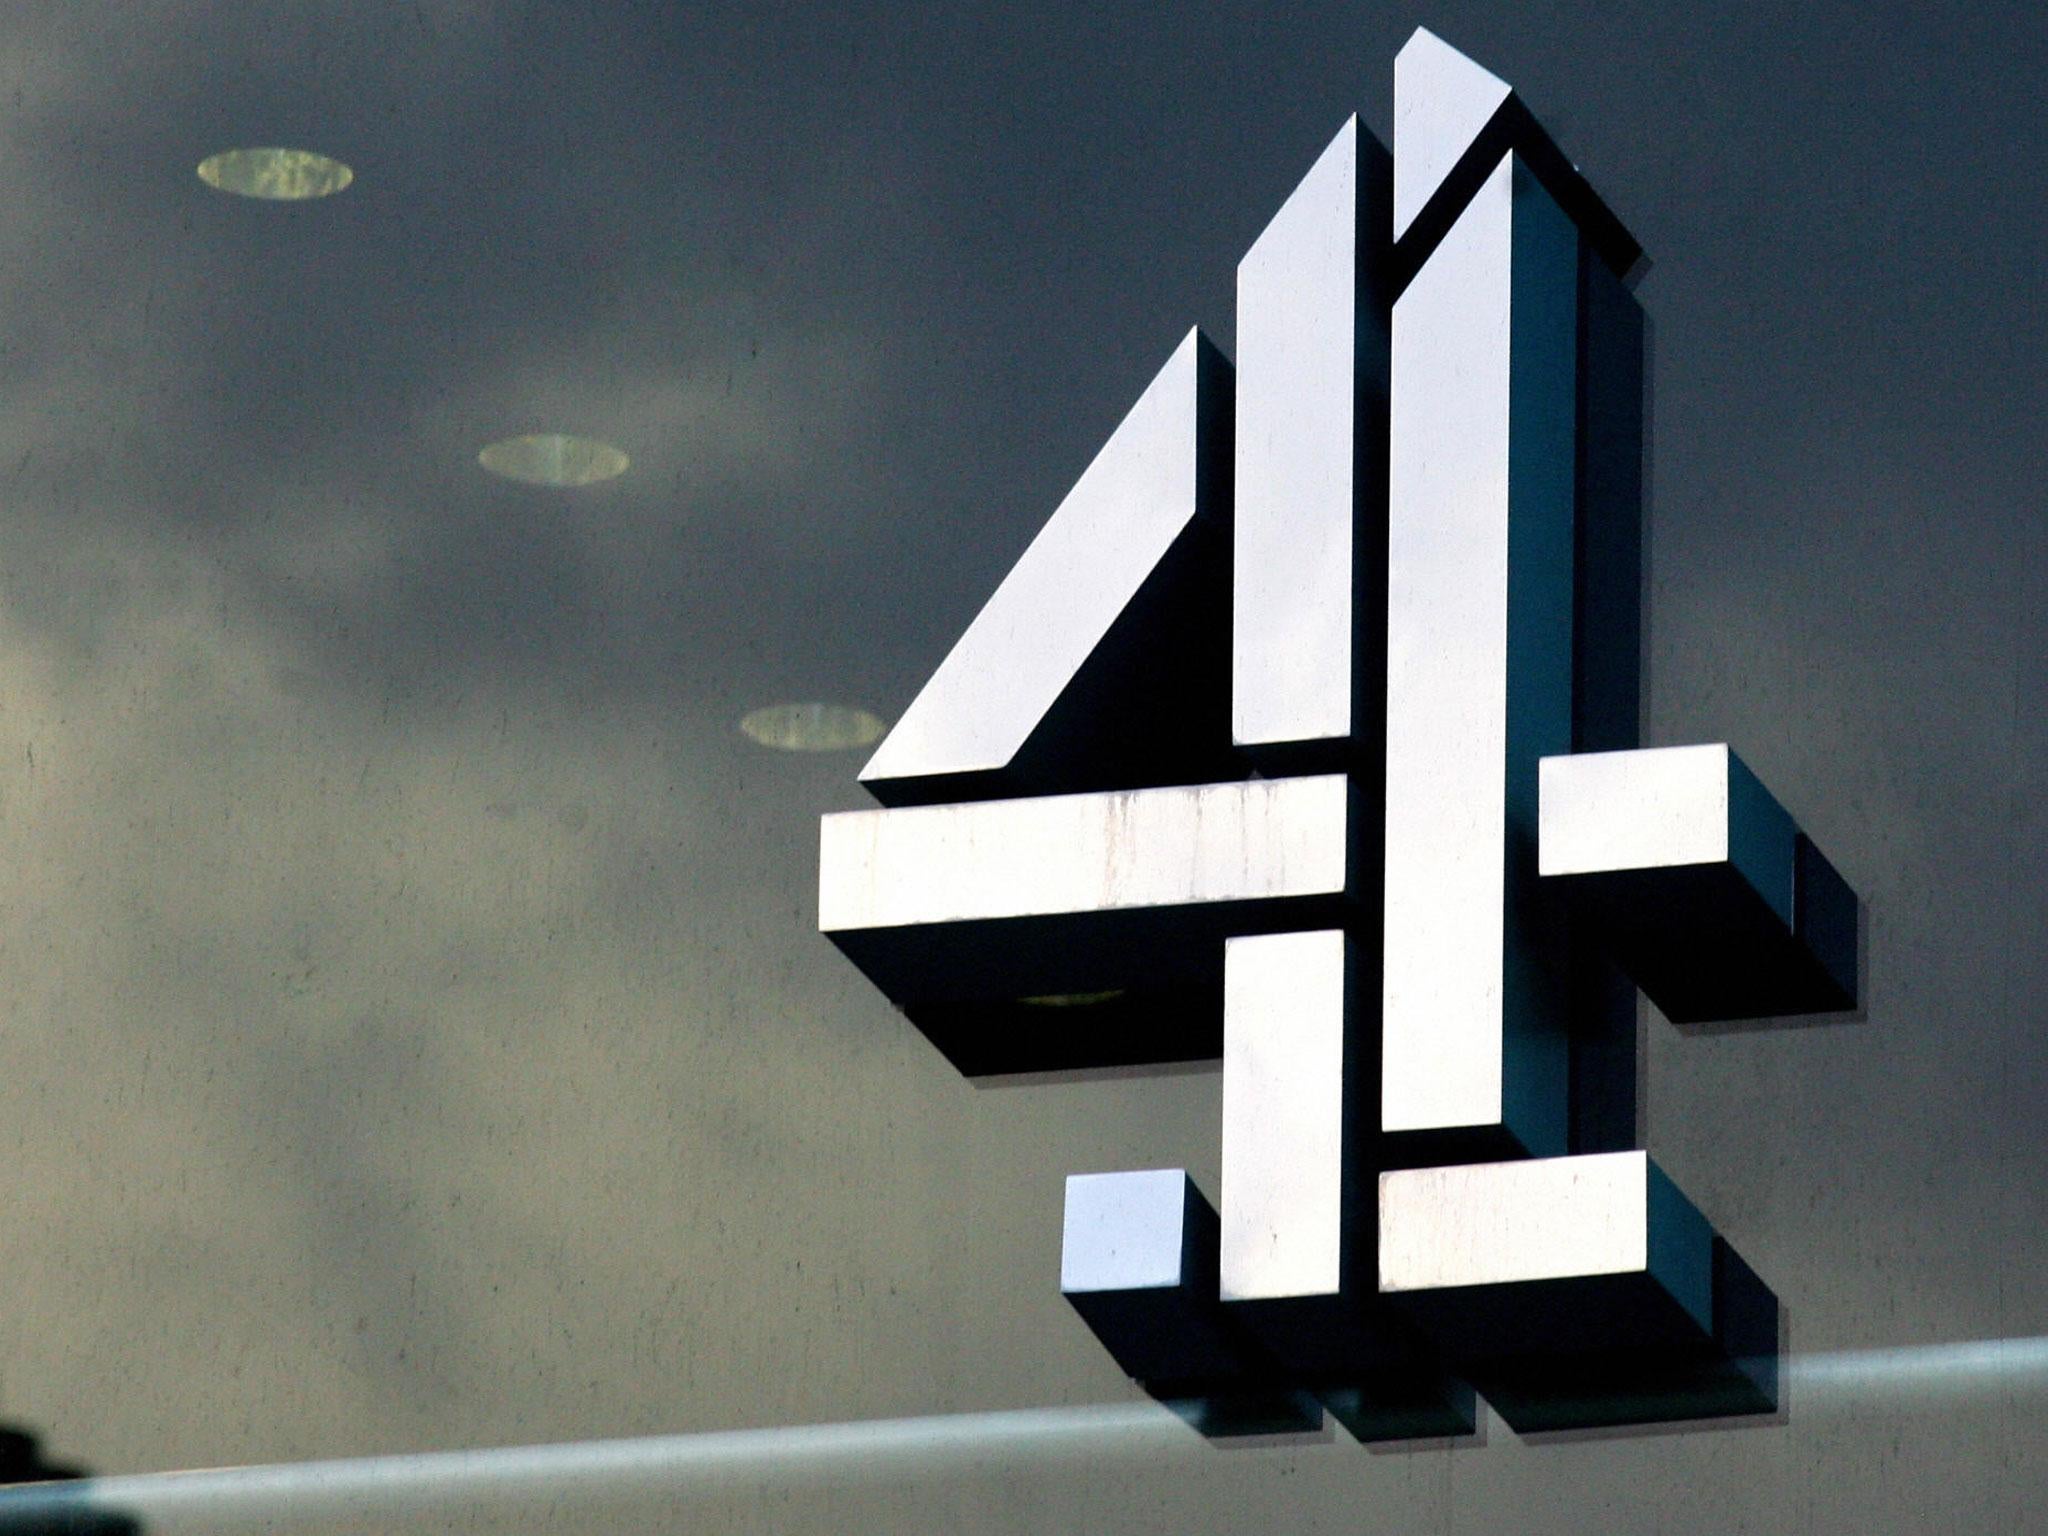 Ministers have flirted with Channel 4 privatisation